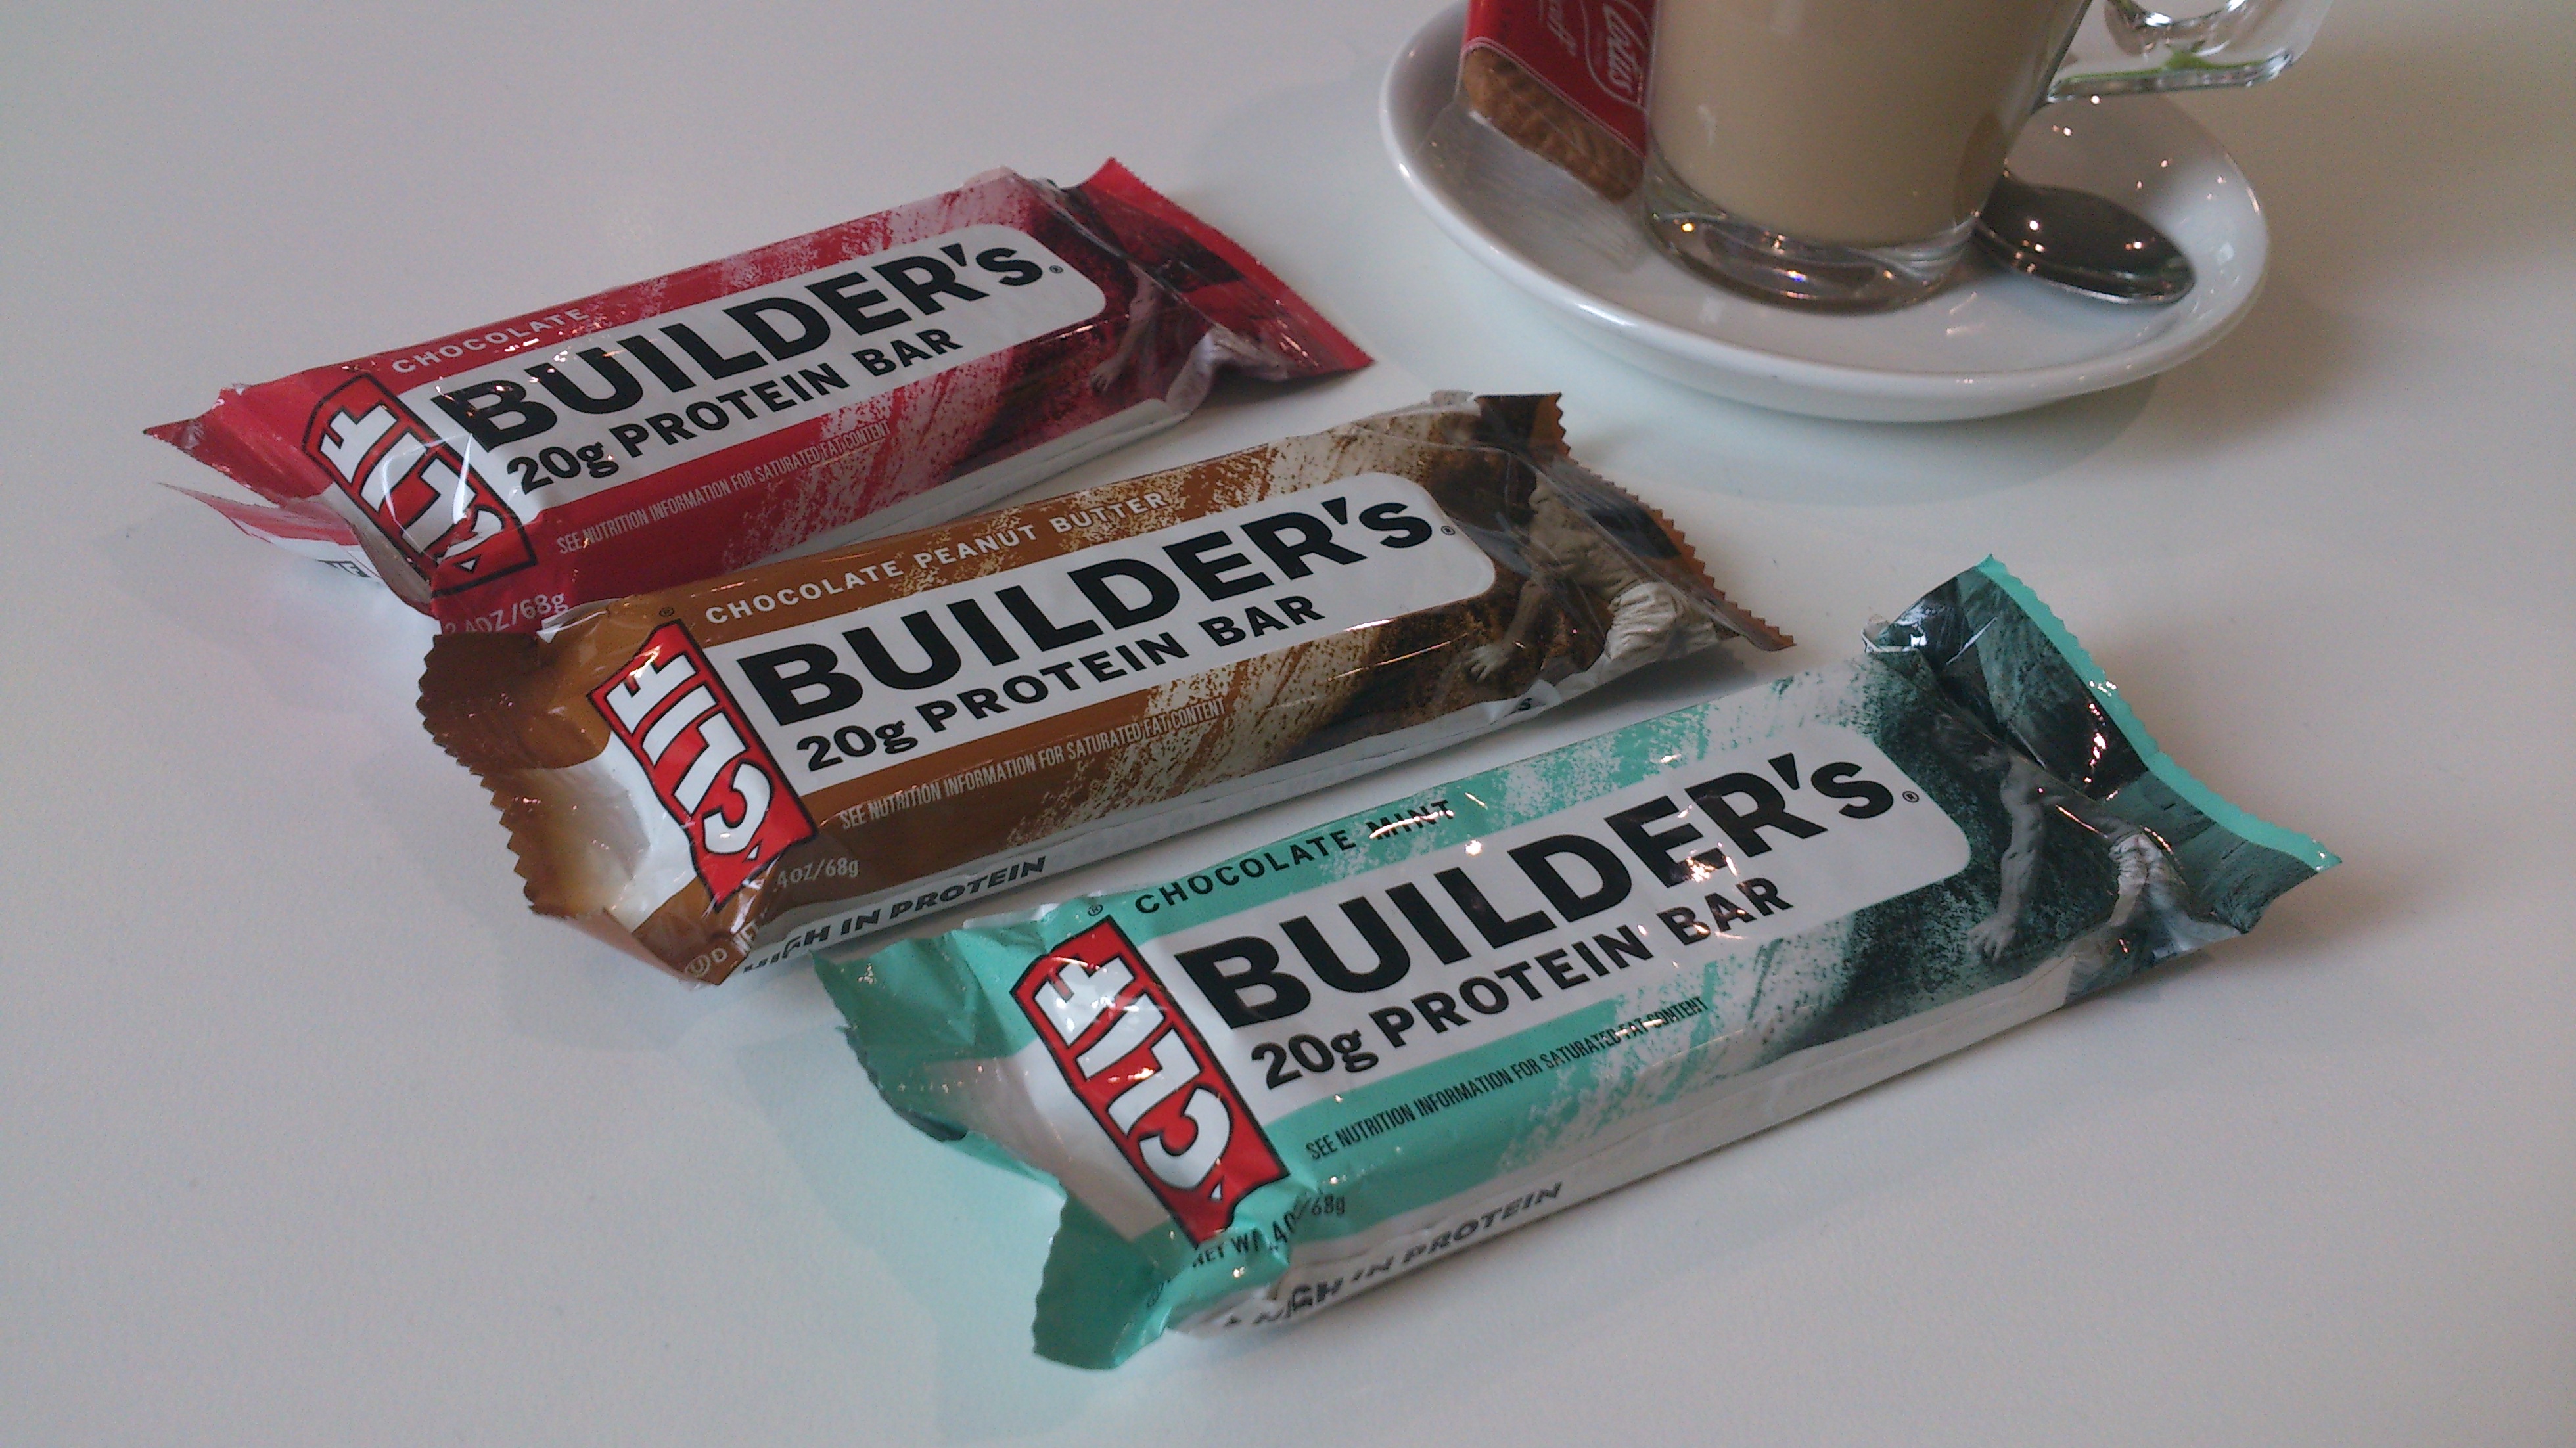 Clif brings out a protein bar